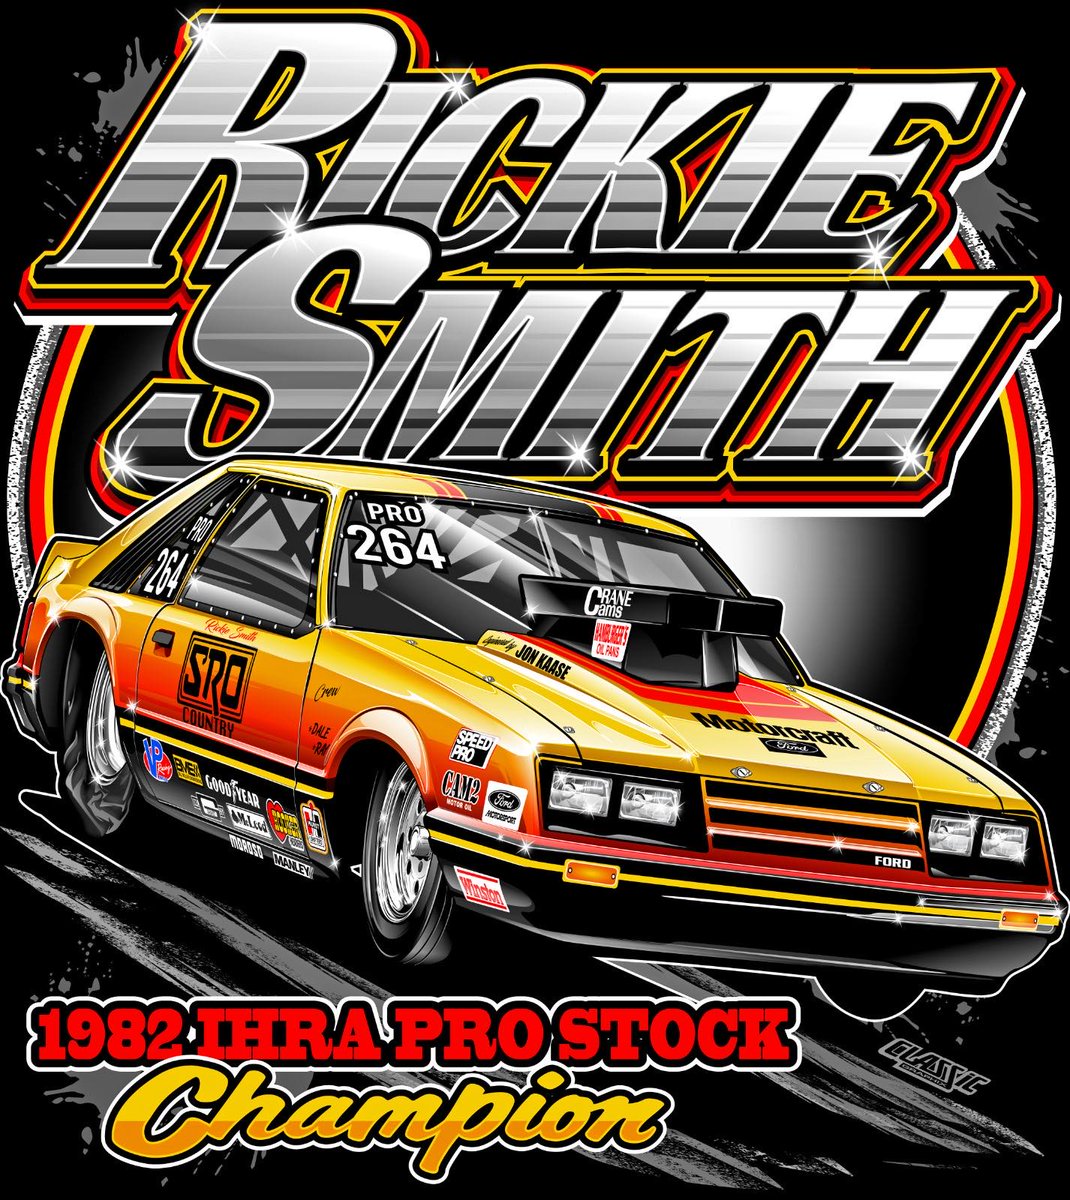 Check out the latest shirt coming into the CompetitionPlusStore.com, Rickie Smith's 1982 championship shirt. PRE-ORDER YOURS BEFORE THEY SELL OUT - competitionplusstore.com/products/avail…